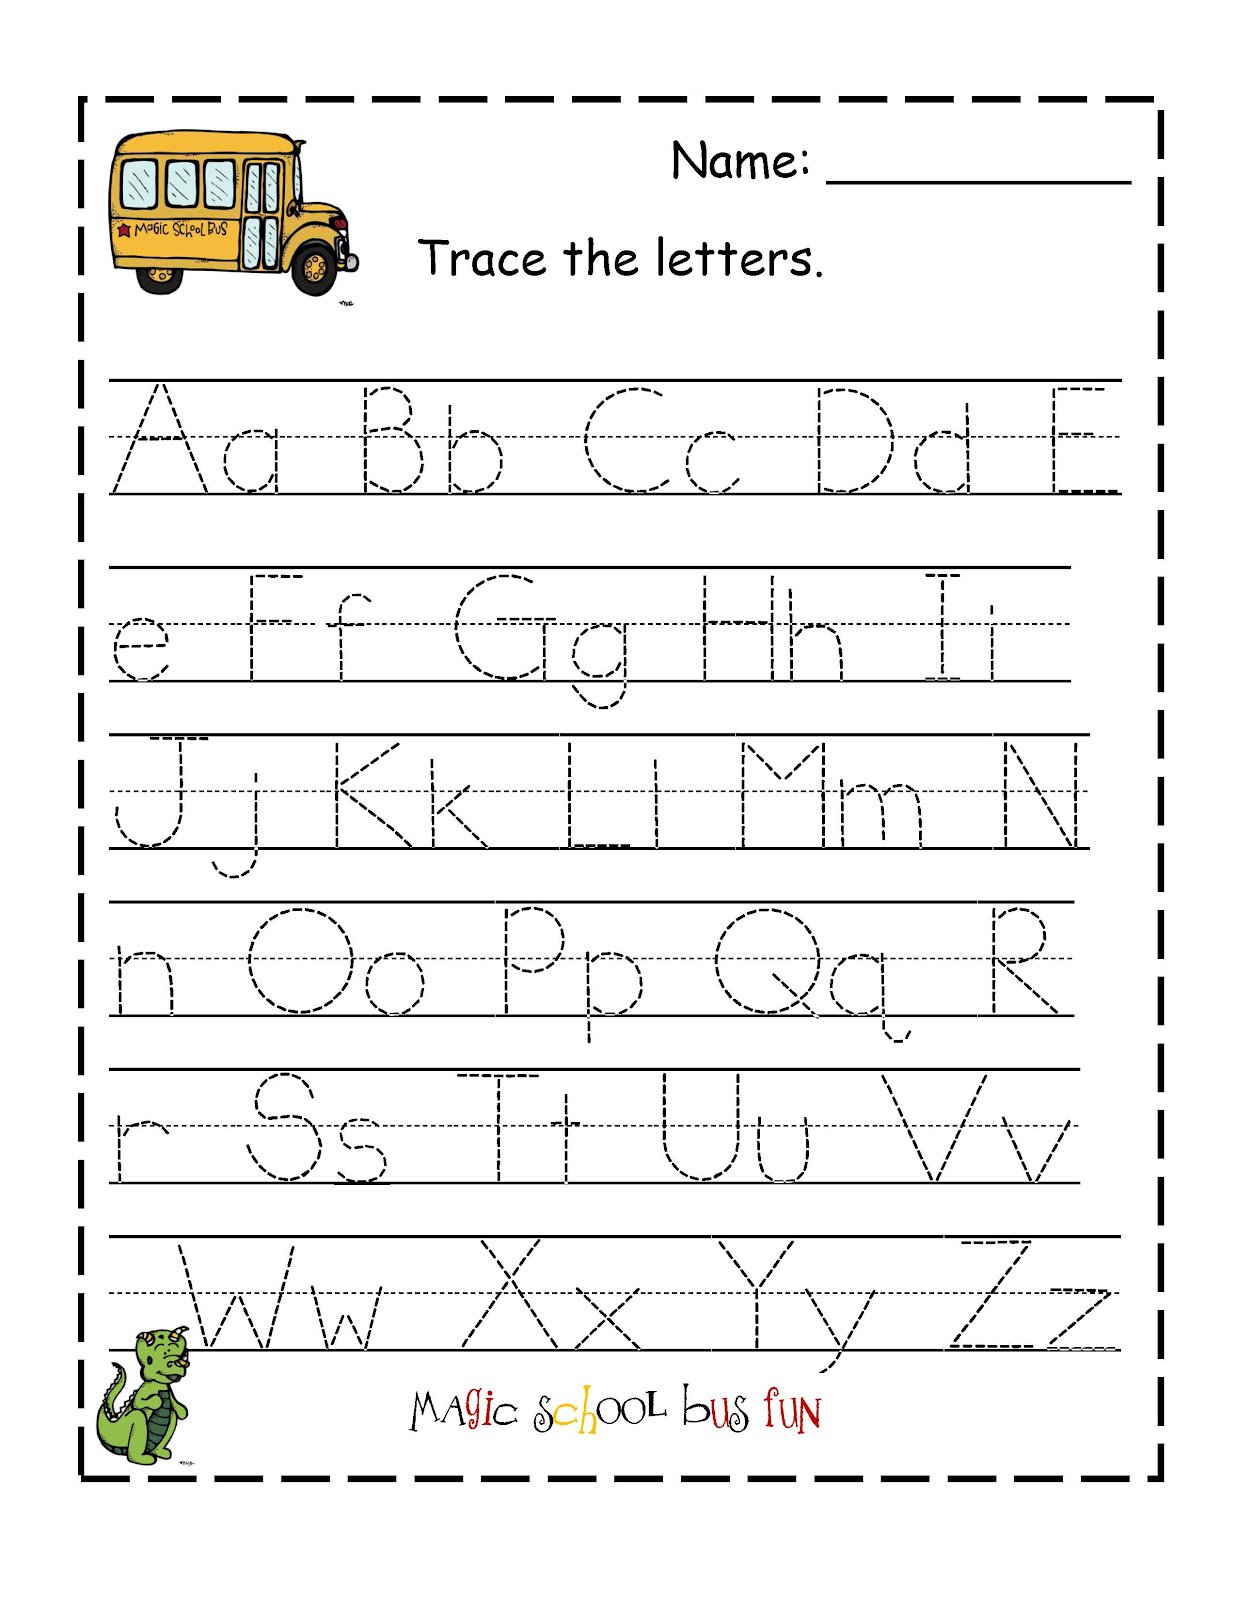 Traceable Letters Worksheets Free The Best Worksheets Image